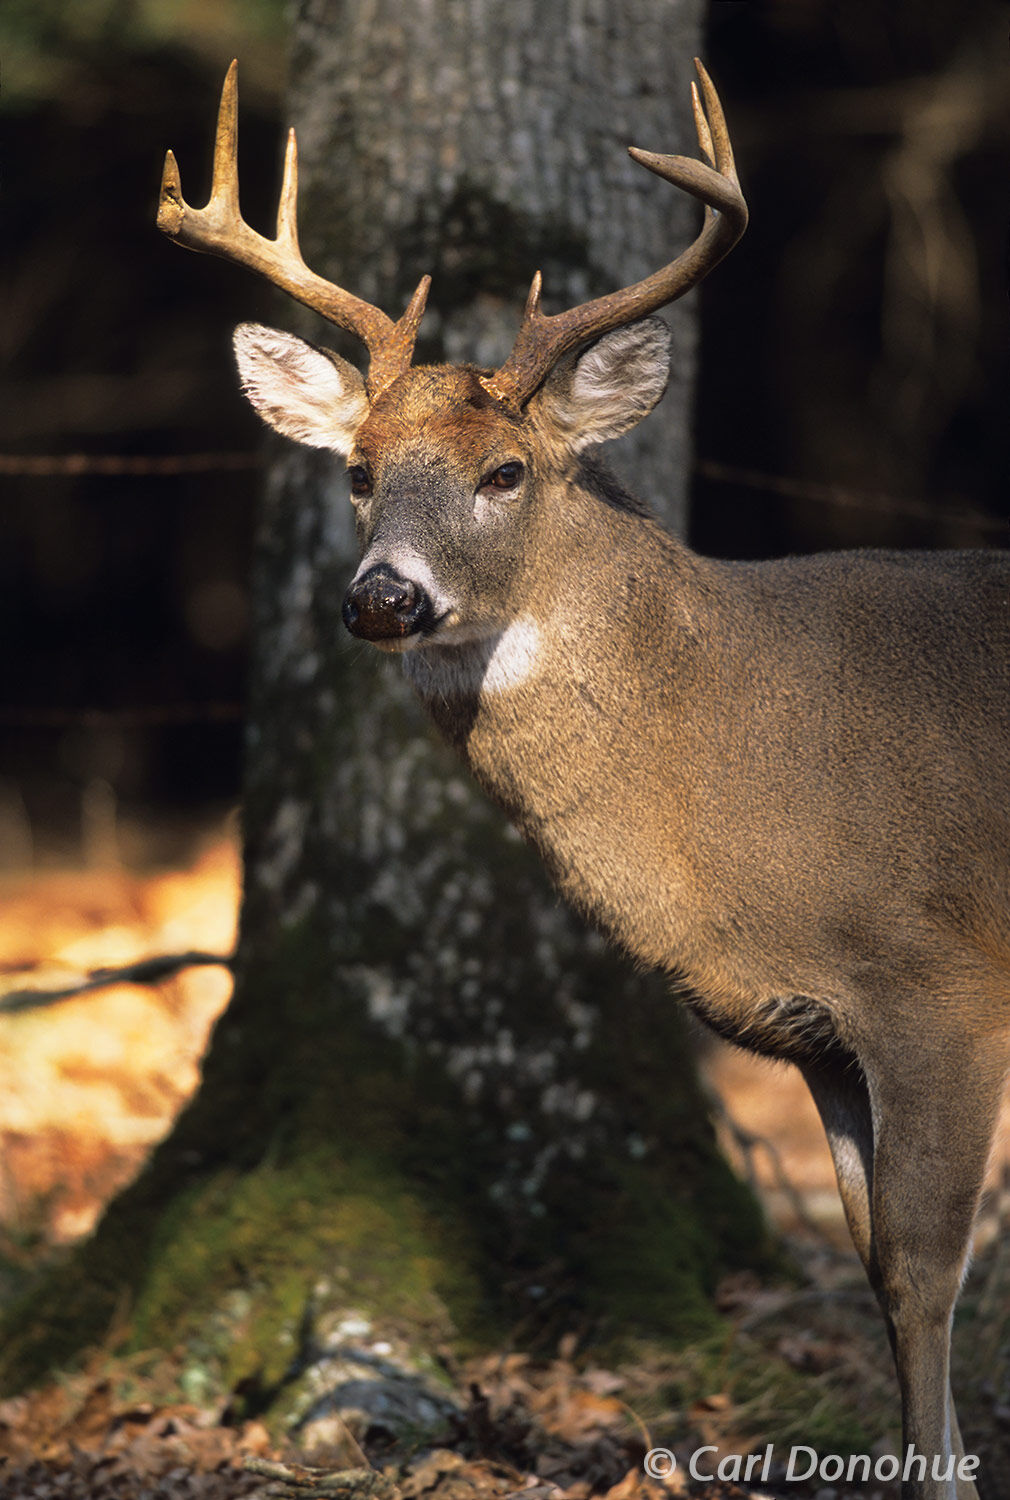 Mature adult whitetail deer buck, a 10 point buck, standing in the forest beside a nearby oak tree, Cades Cove, Great Smoky Mountains...